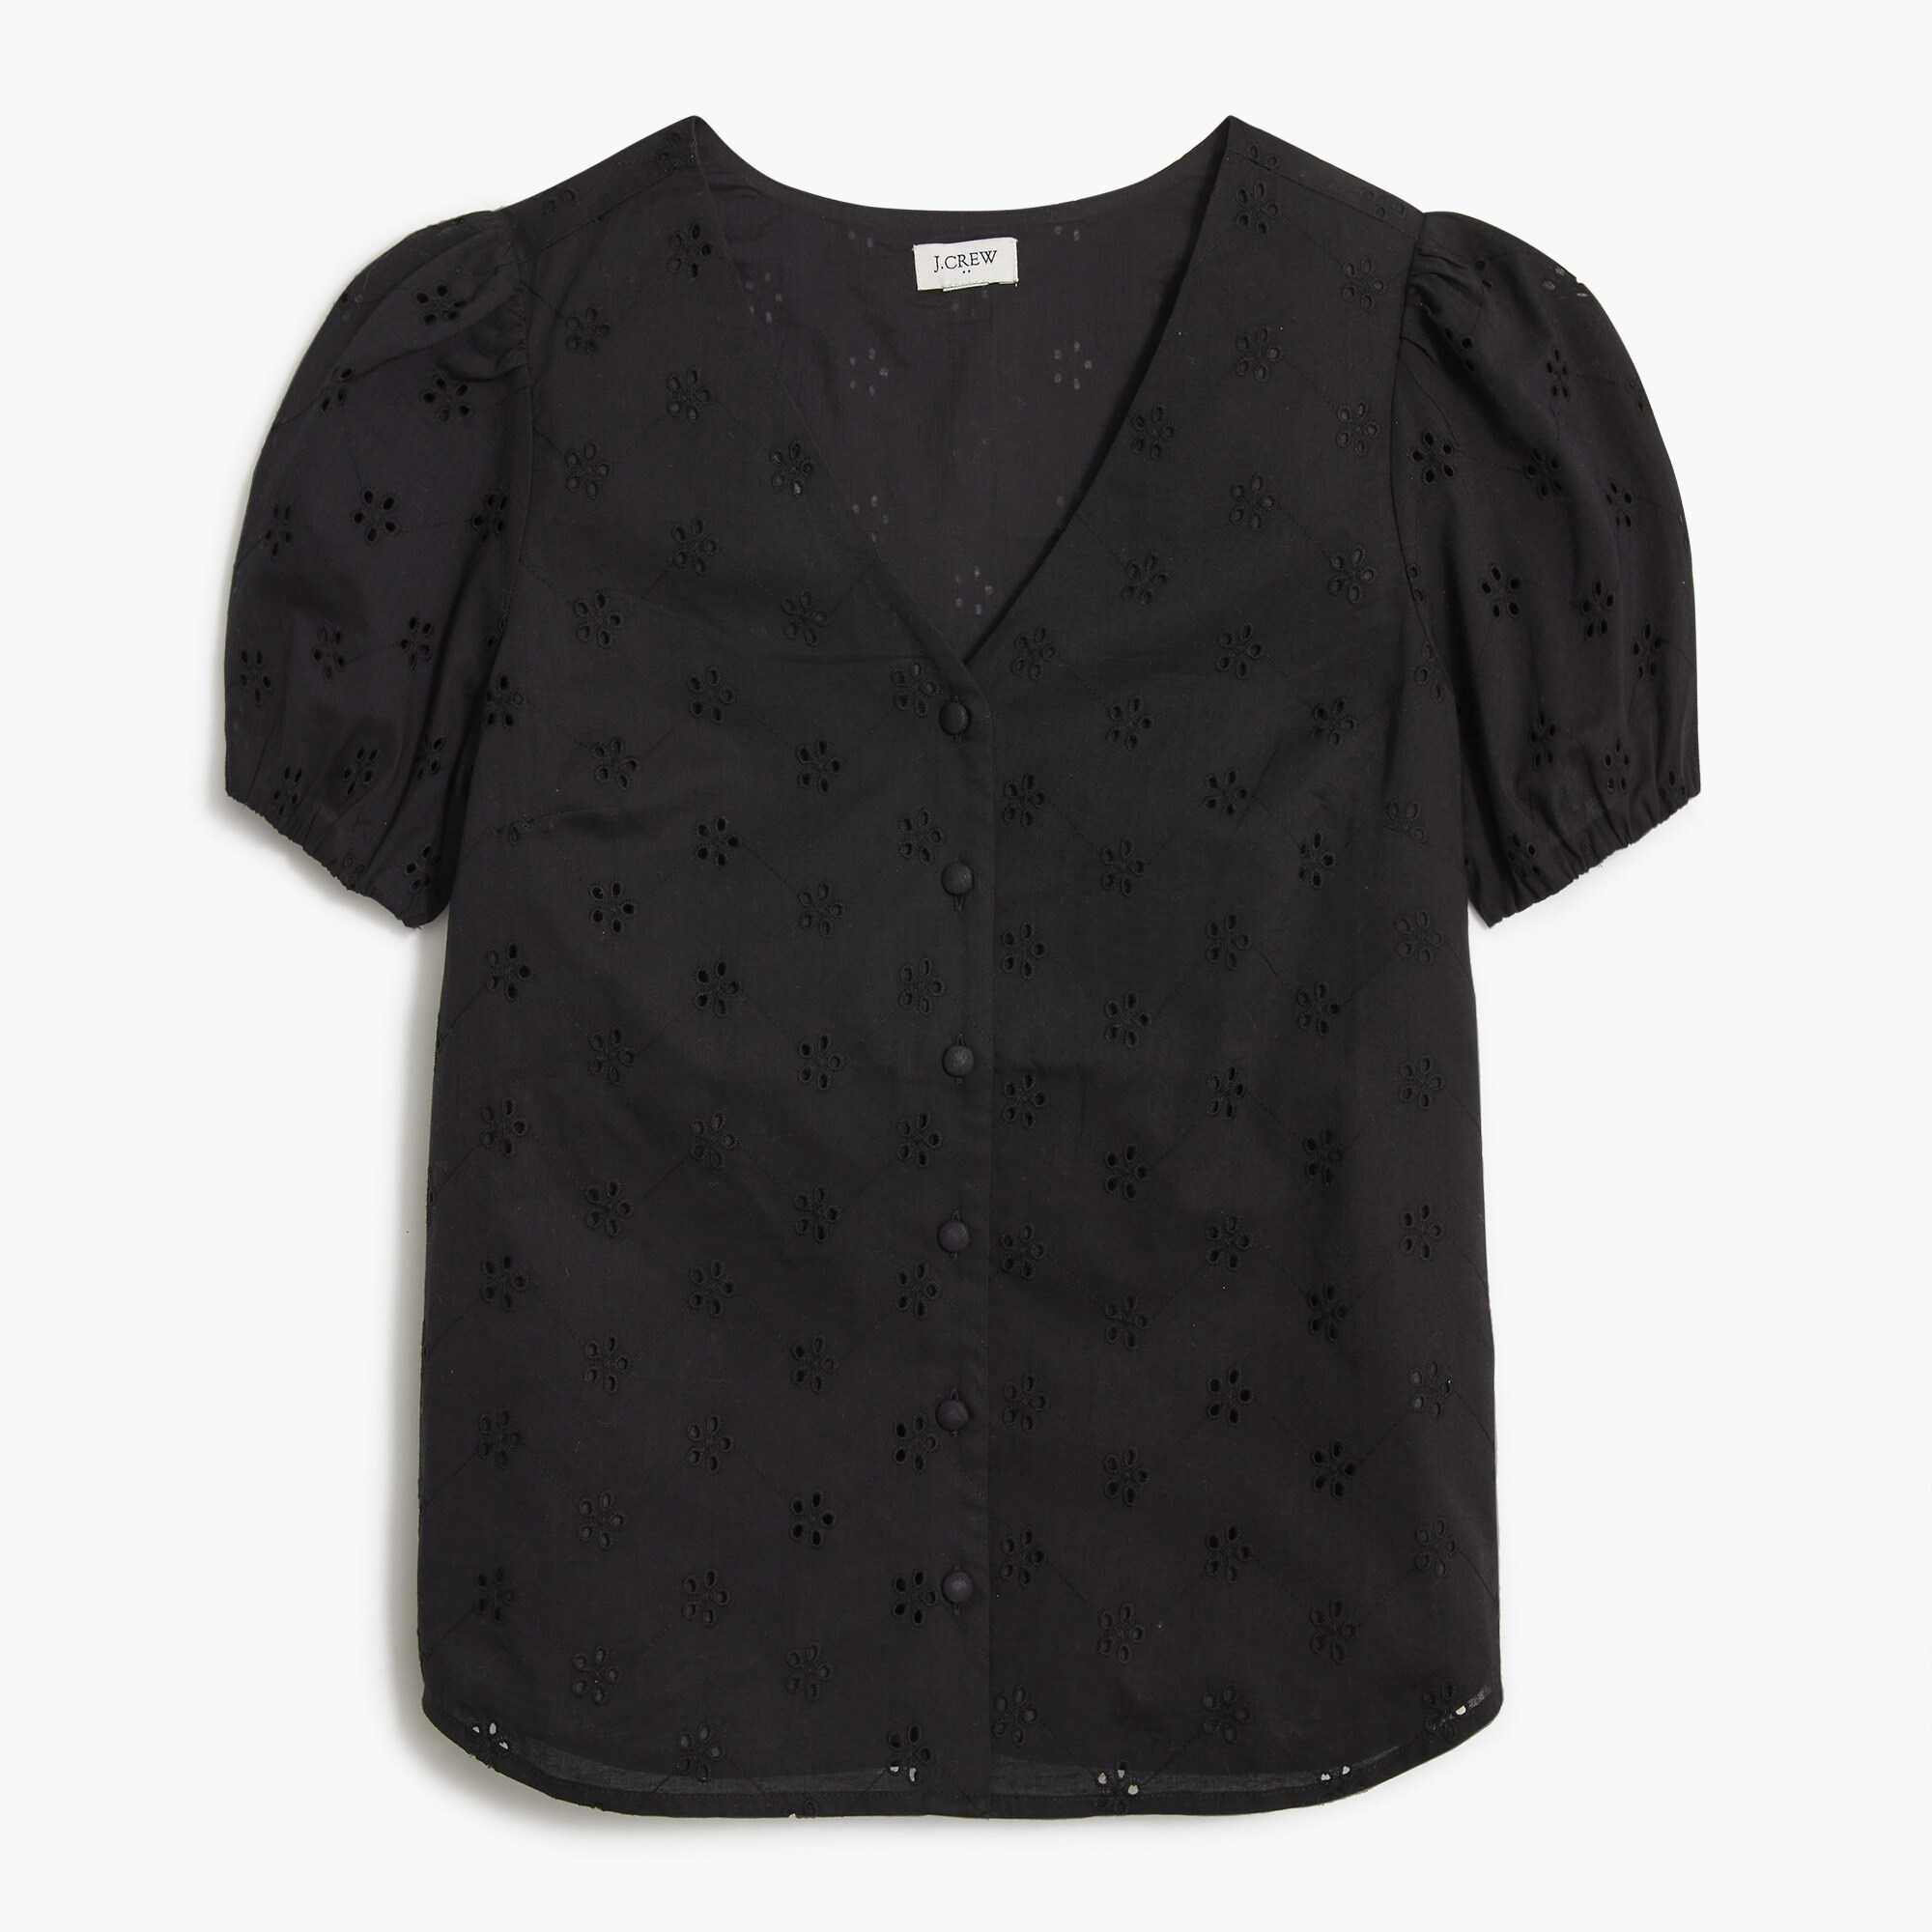  Eyelet button-front shirt